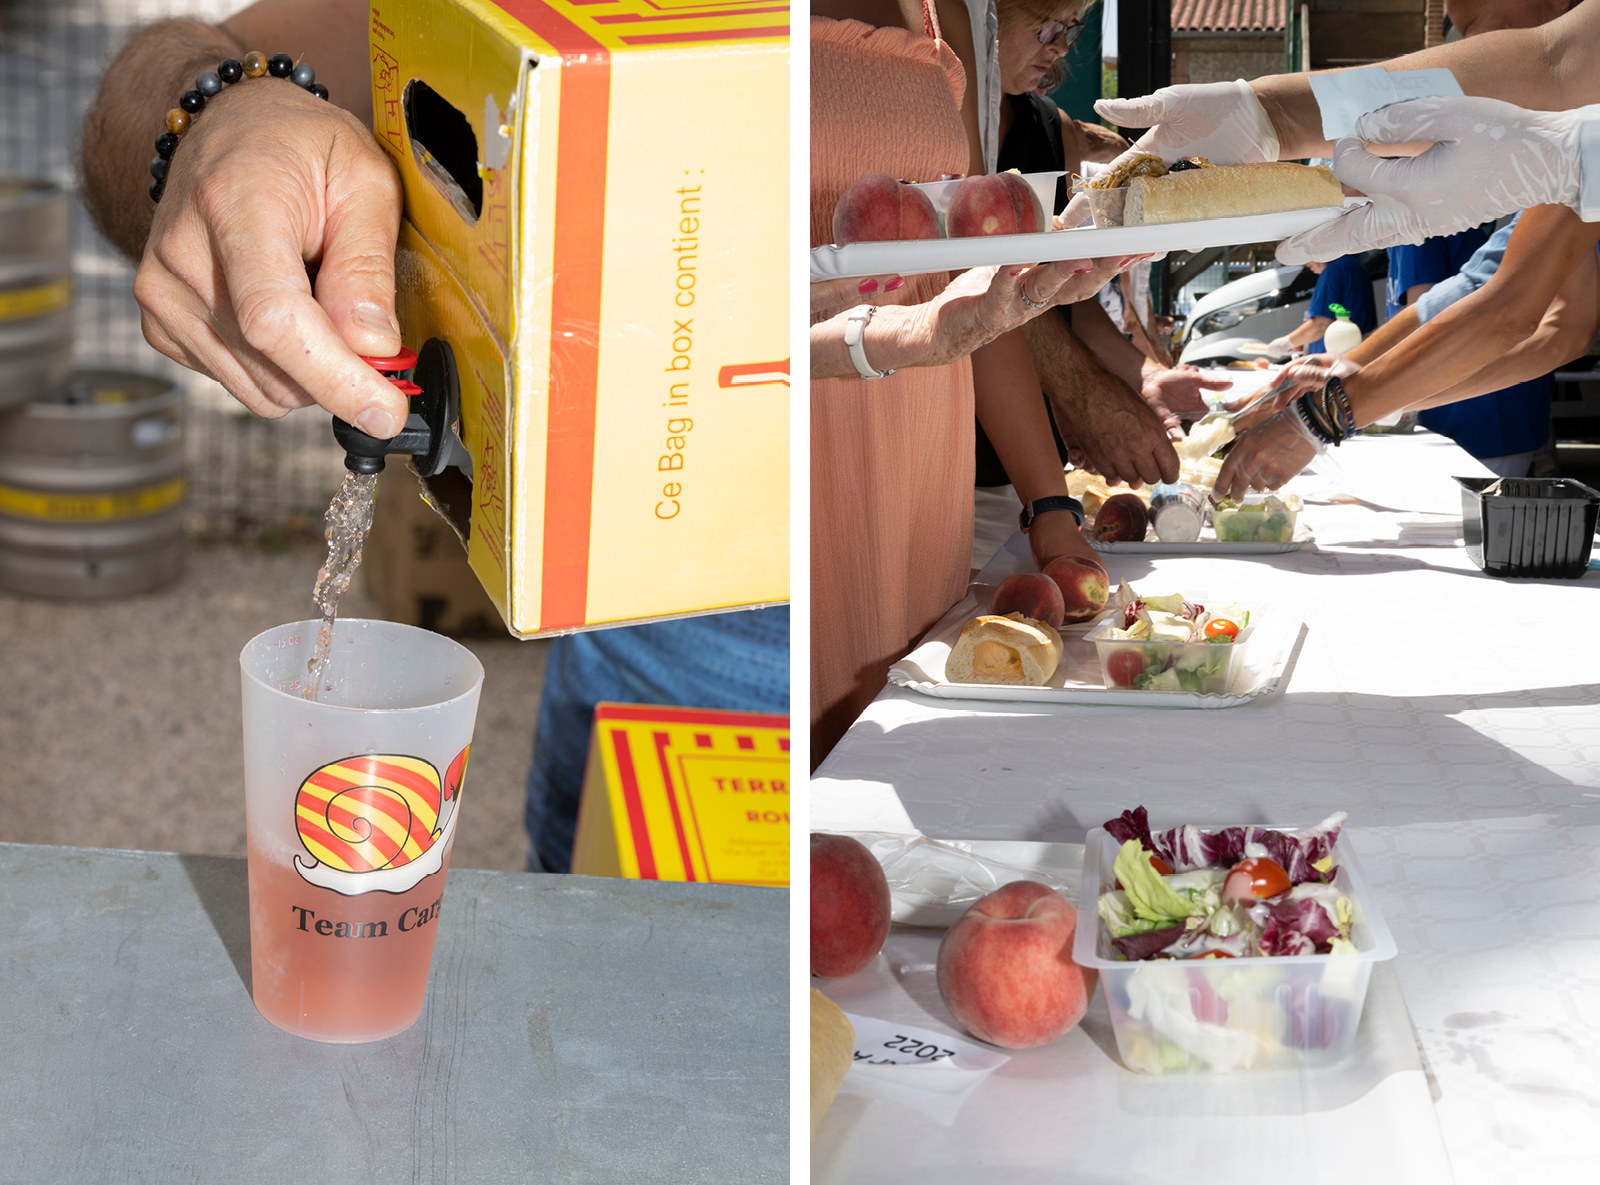 Two images: a person pours rosé from a wine box, and a row of people are served food on trays